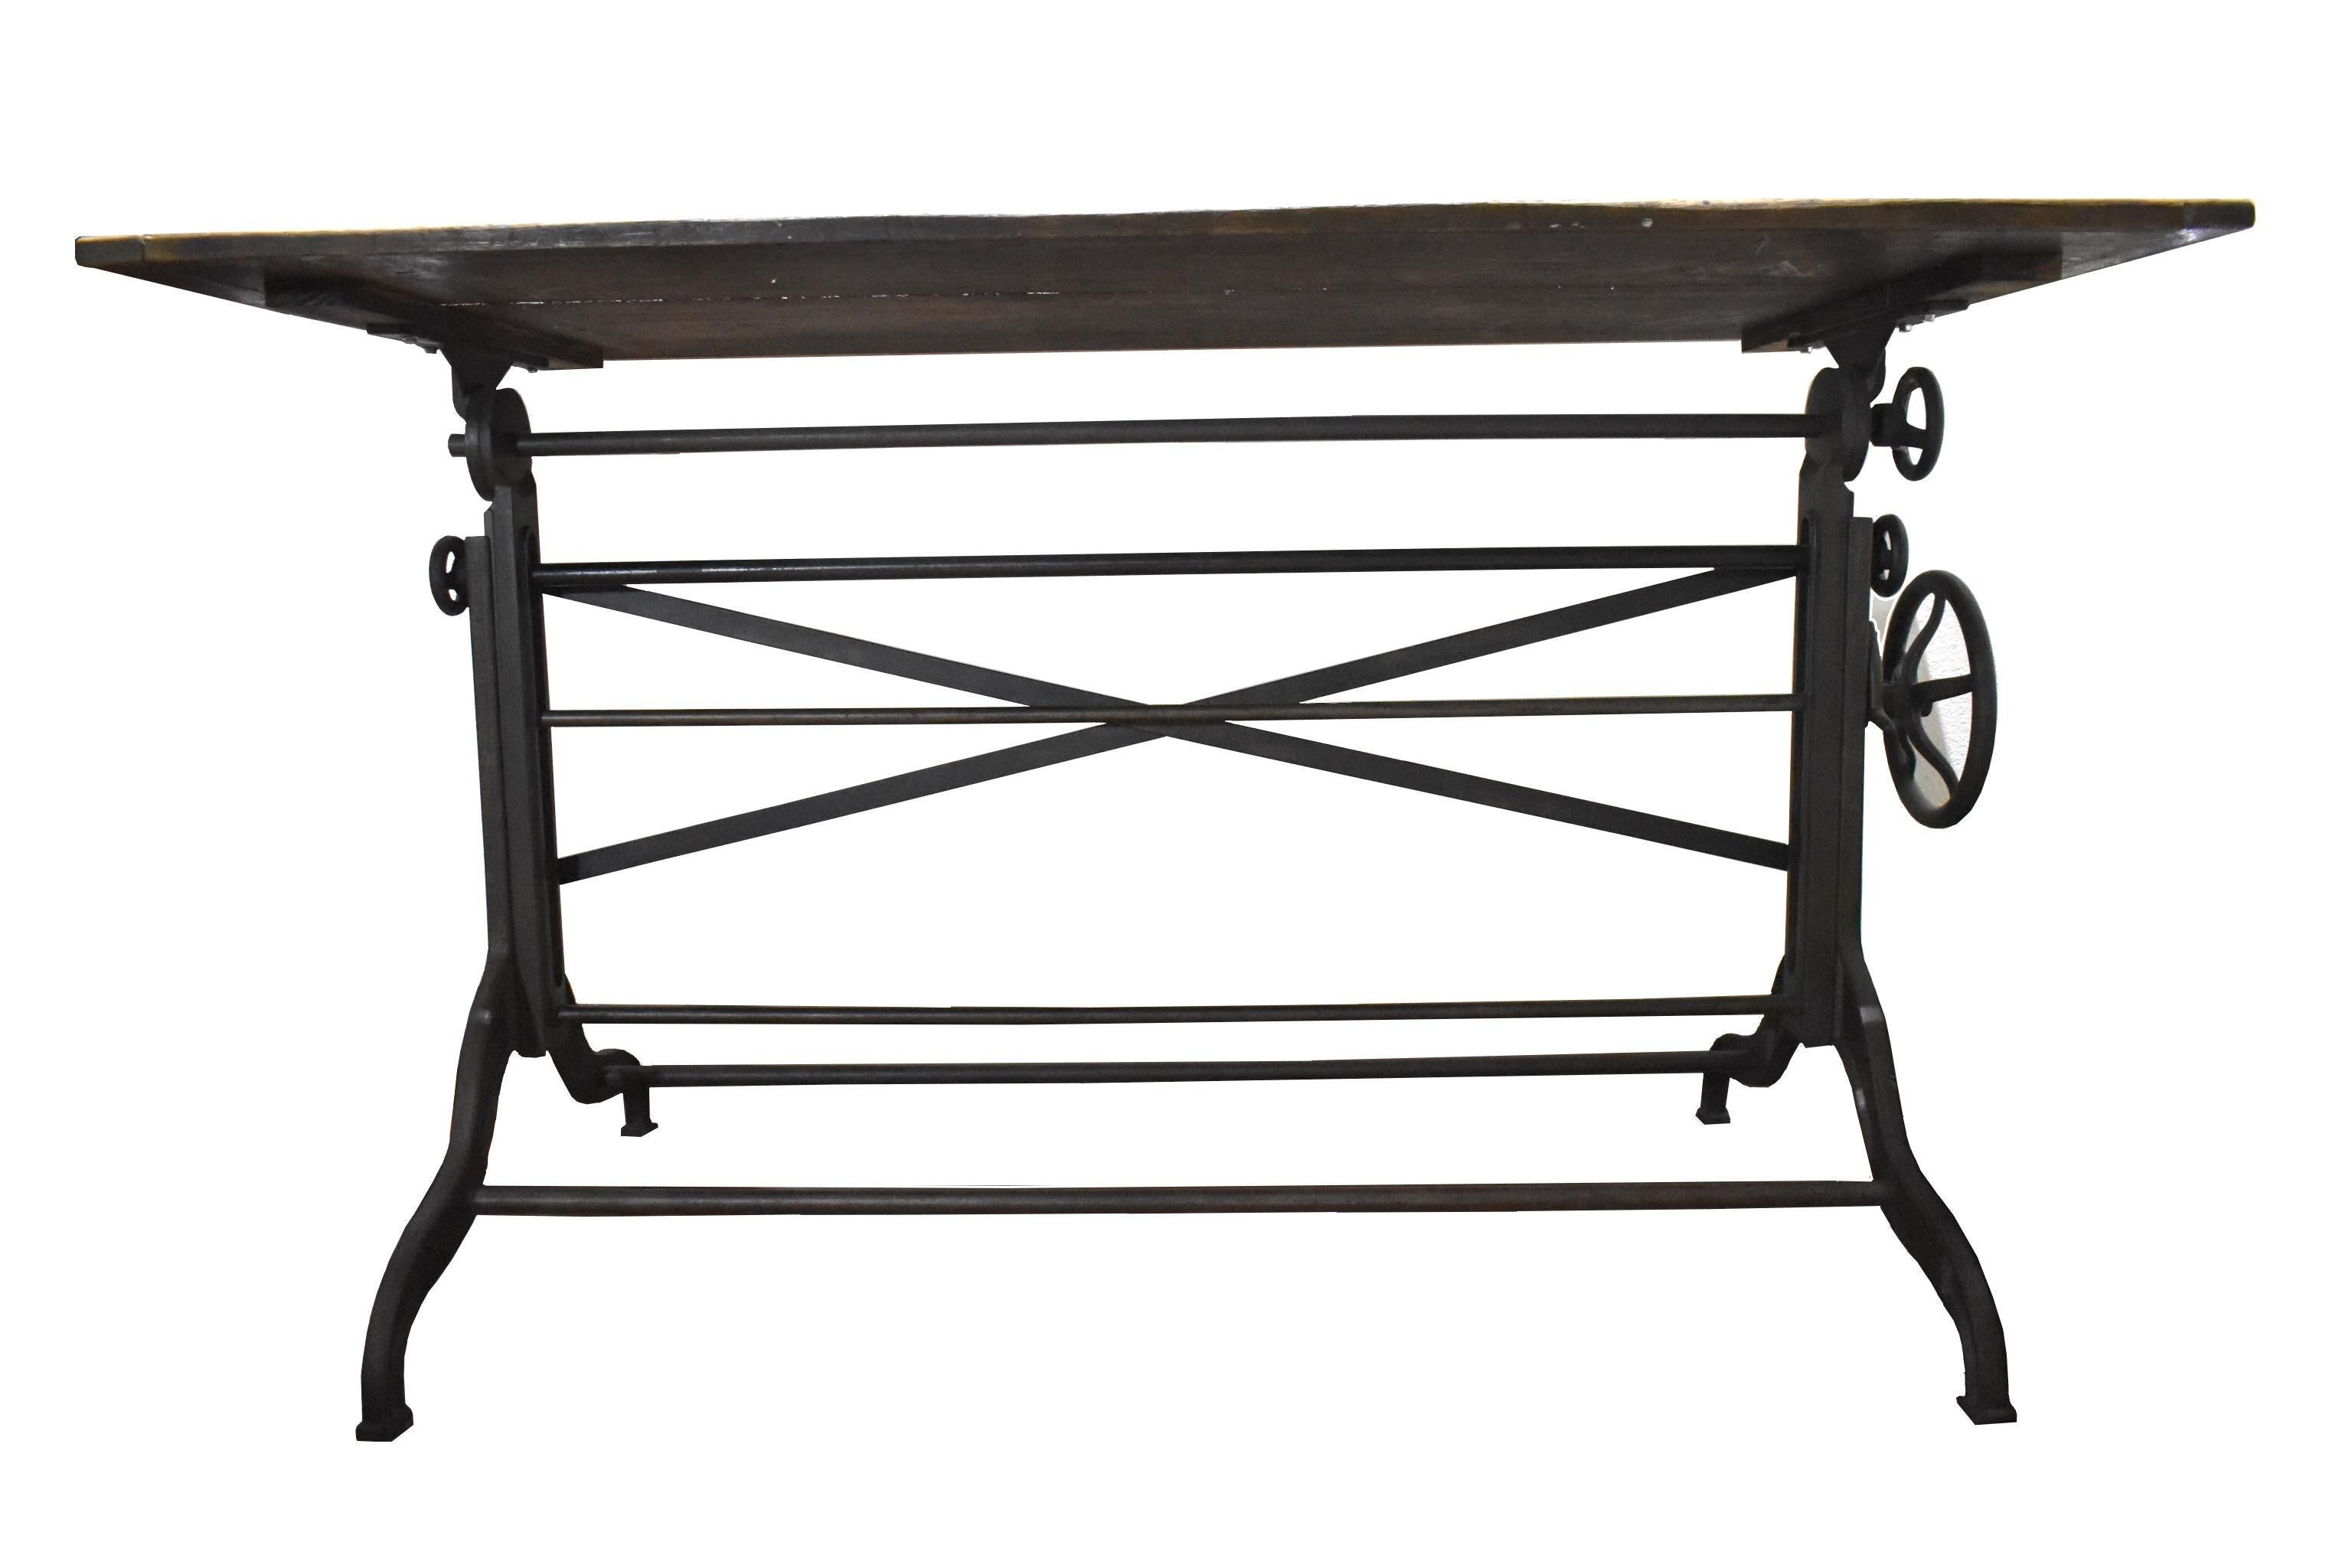 Adjustable height drafting table made in the United States in the 1920s using cast iron. This is the original standing desk! It is amazing to me how every few years we think we came out with this great new idea and then, when we look at our past we